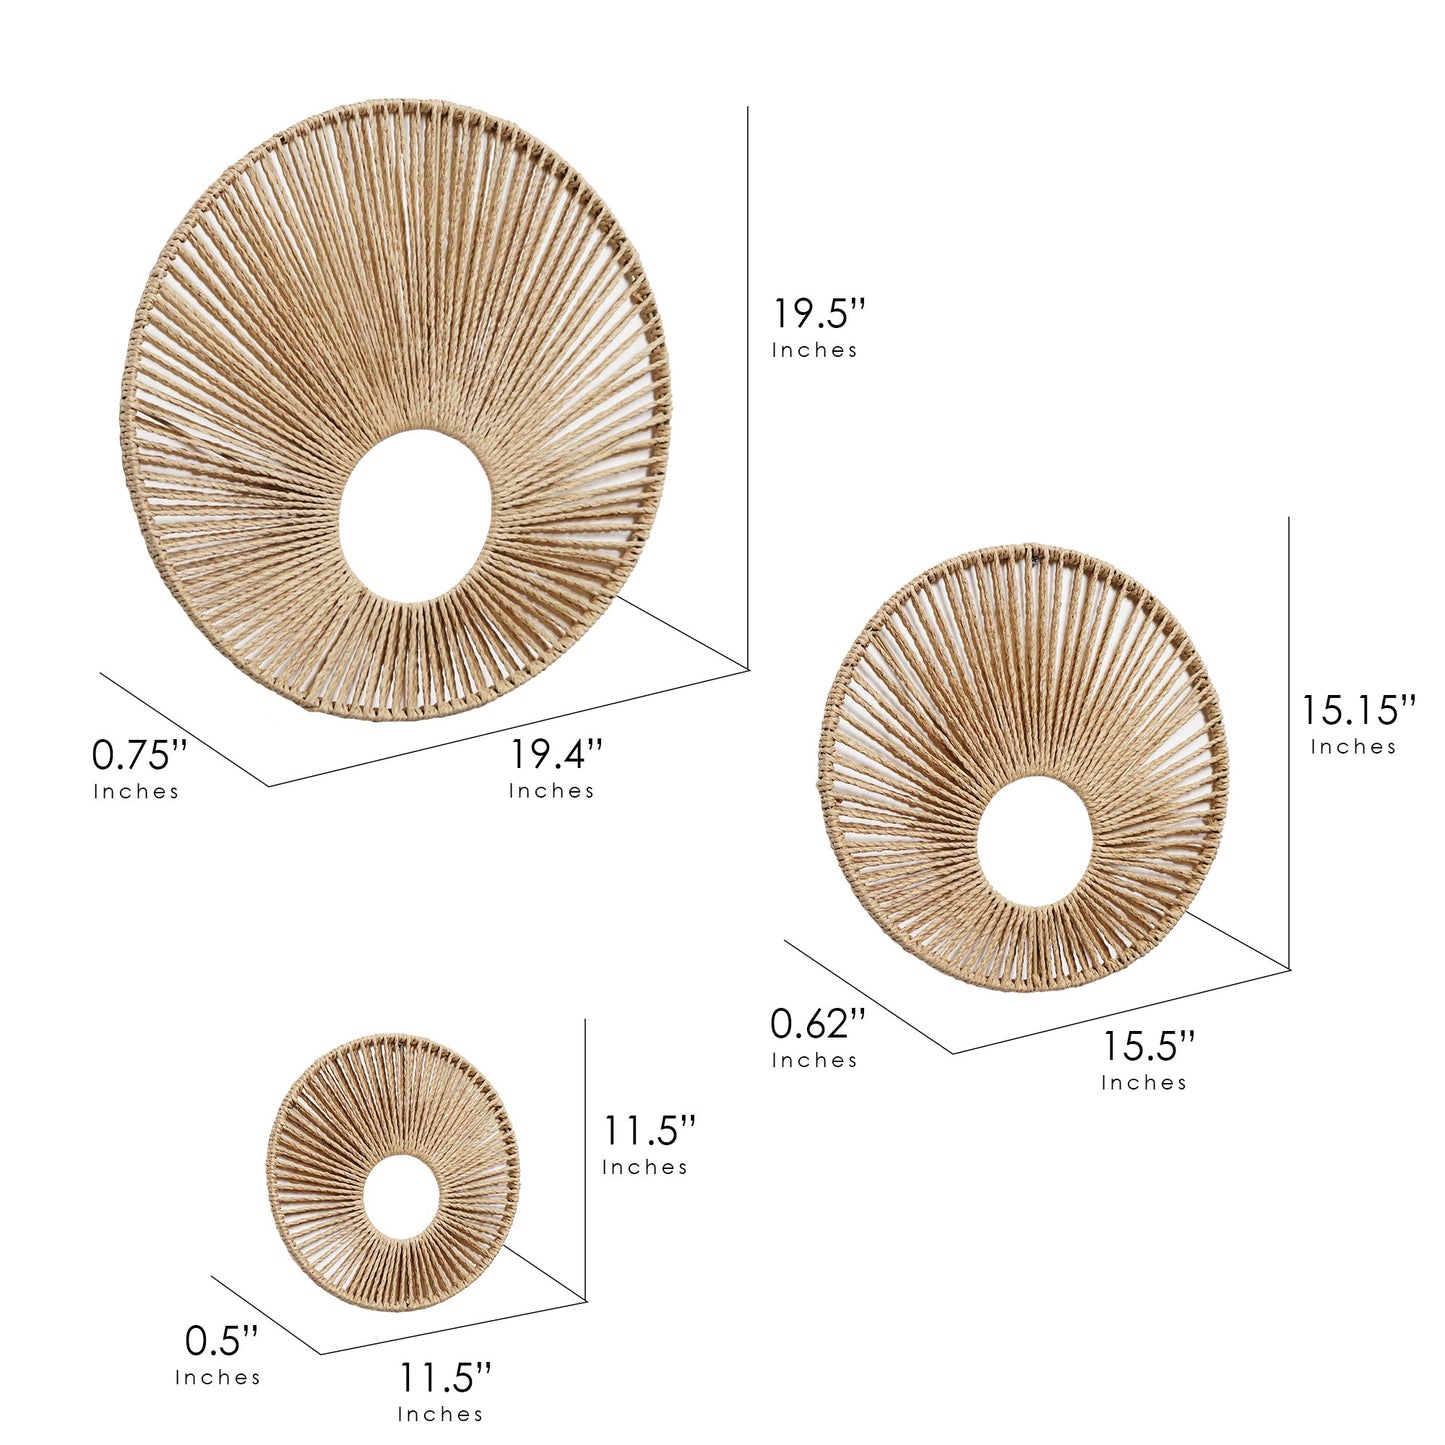 Woven Paper Rope Wall Decor Set of 3 - Natural